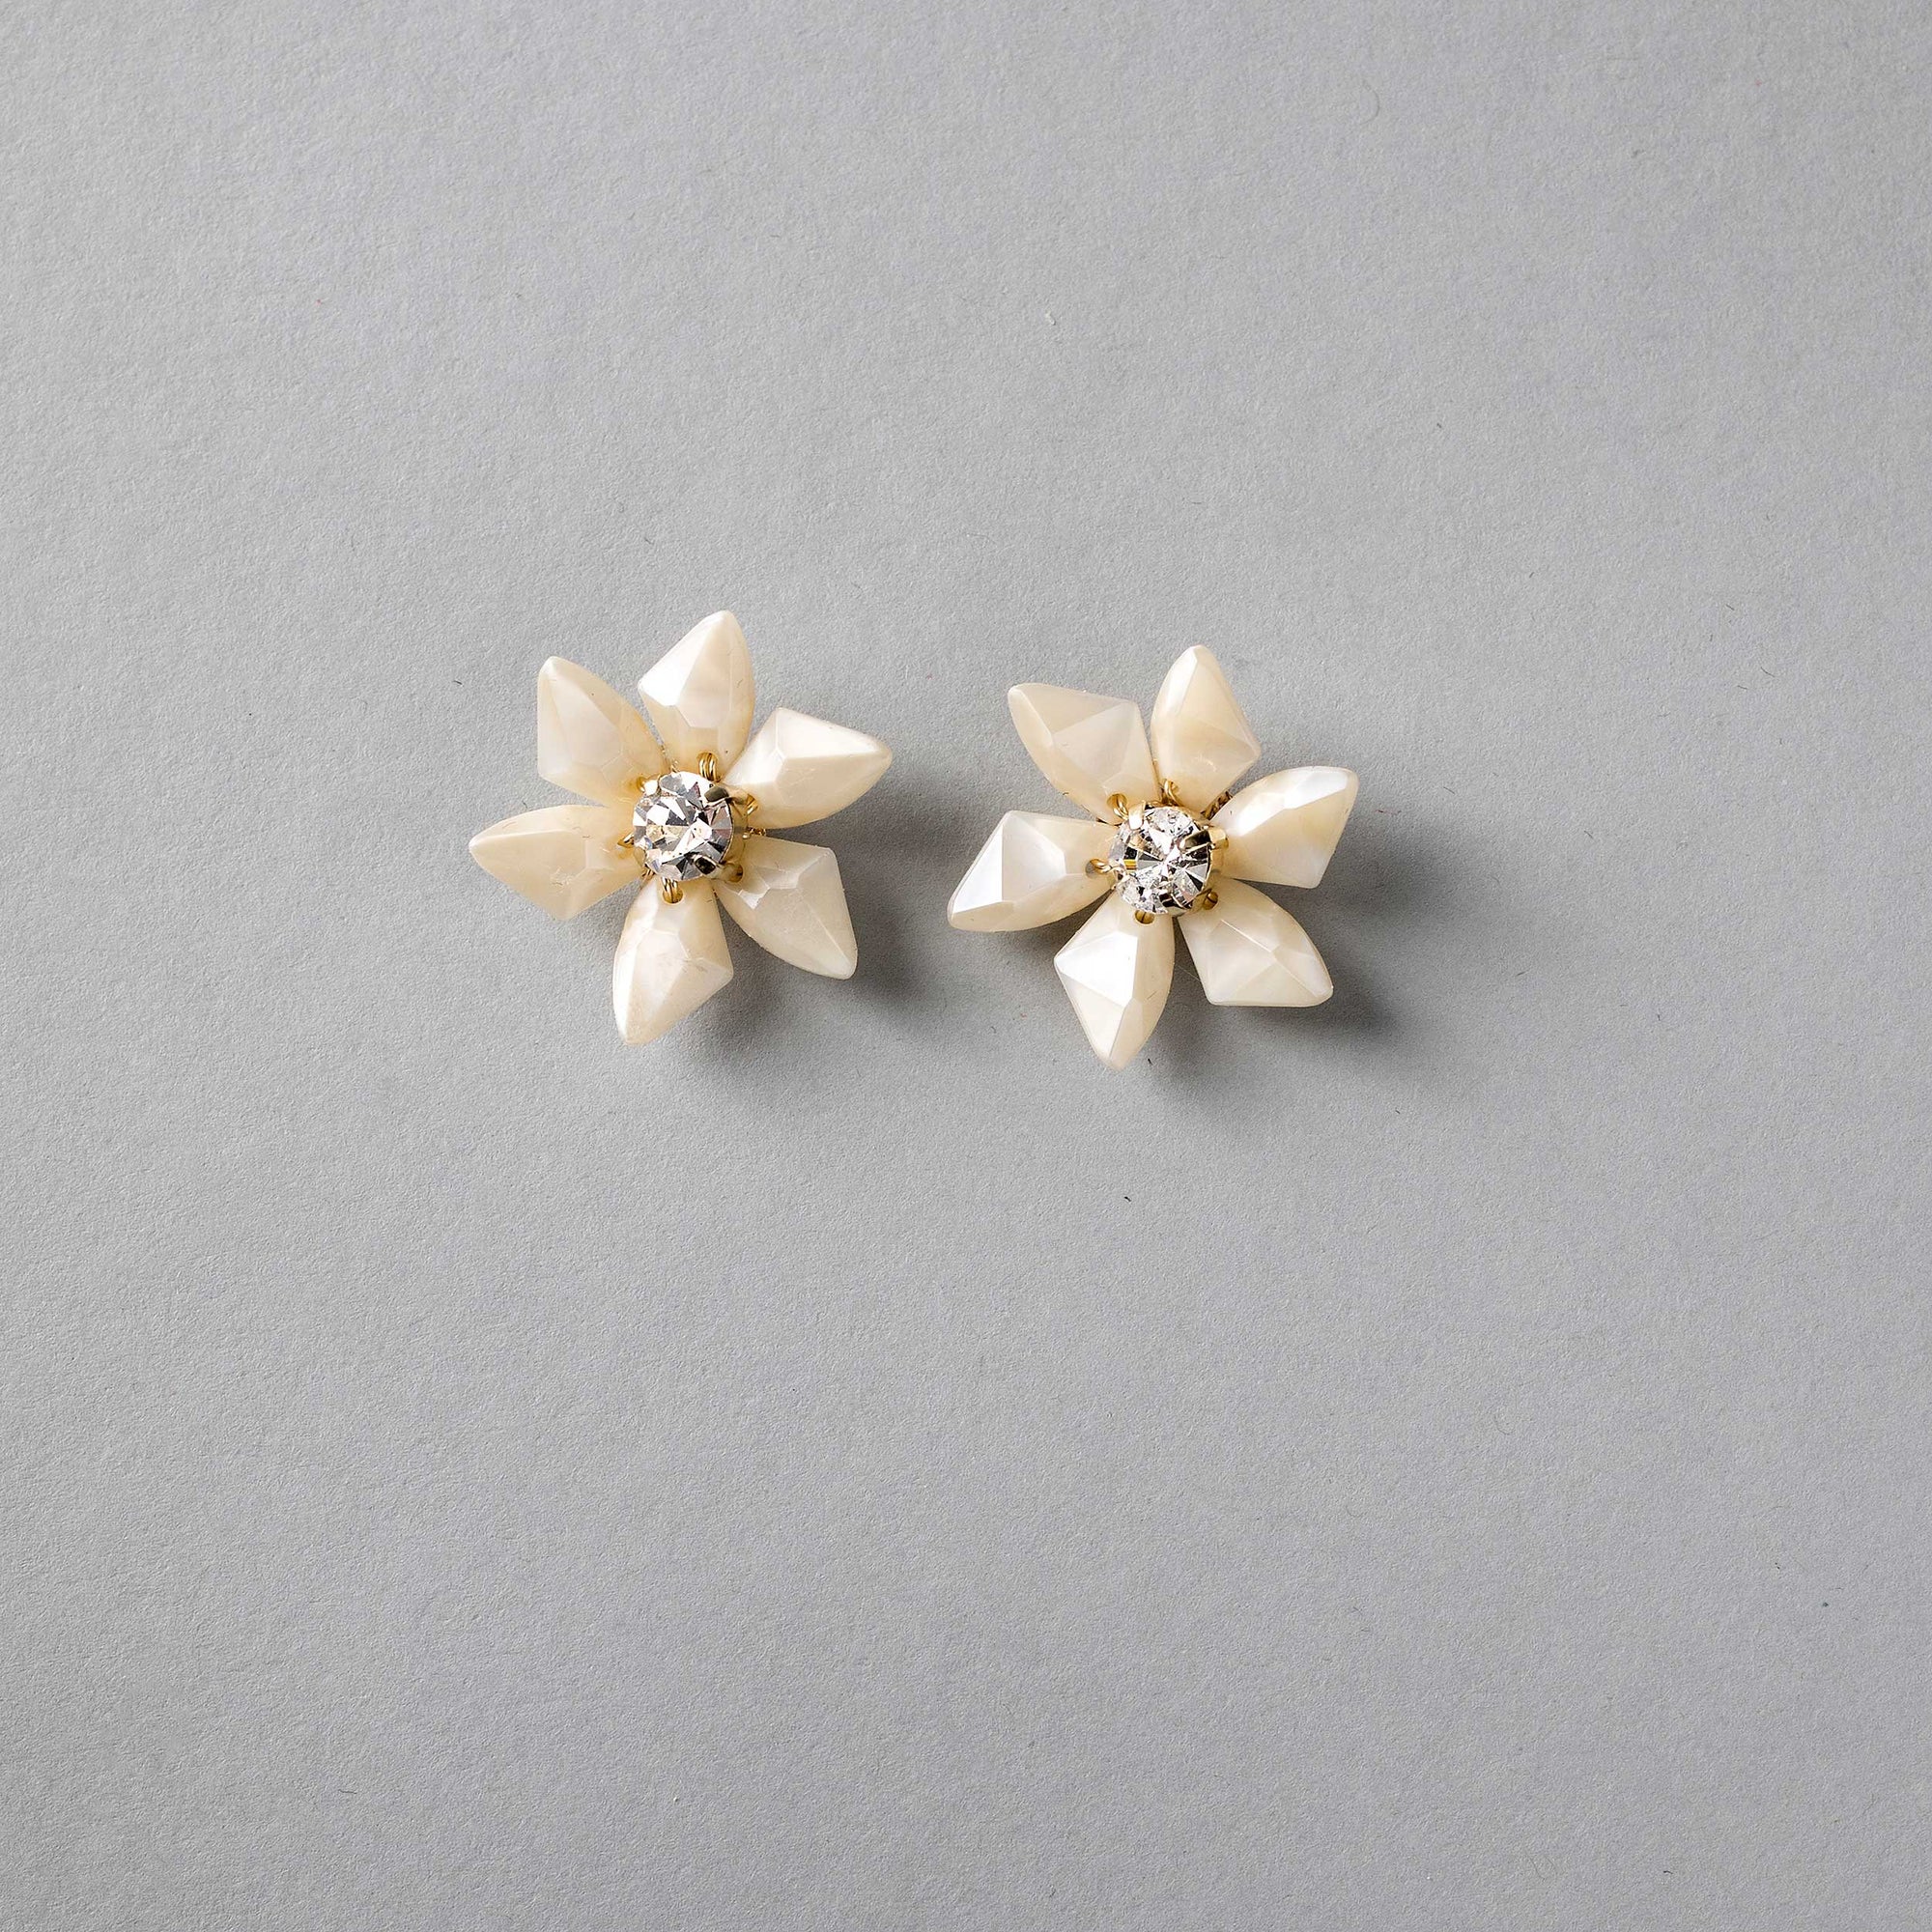 Ivory and Gold Flower Stud Earrings